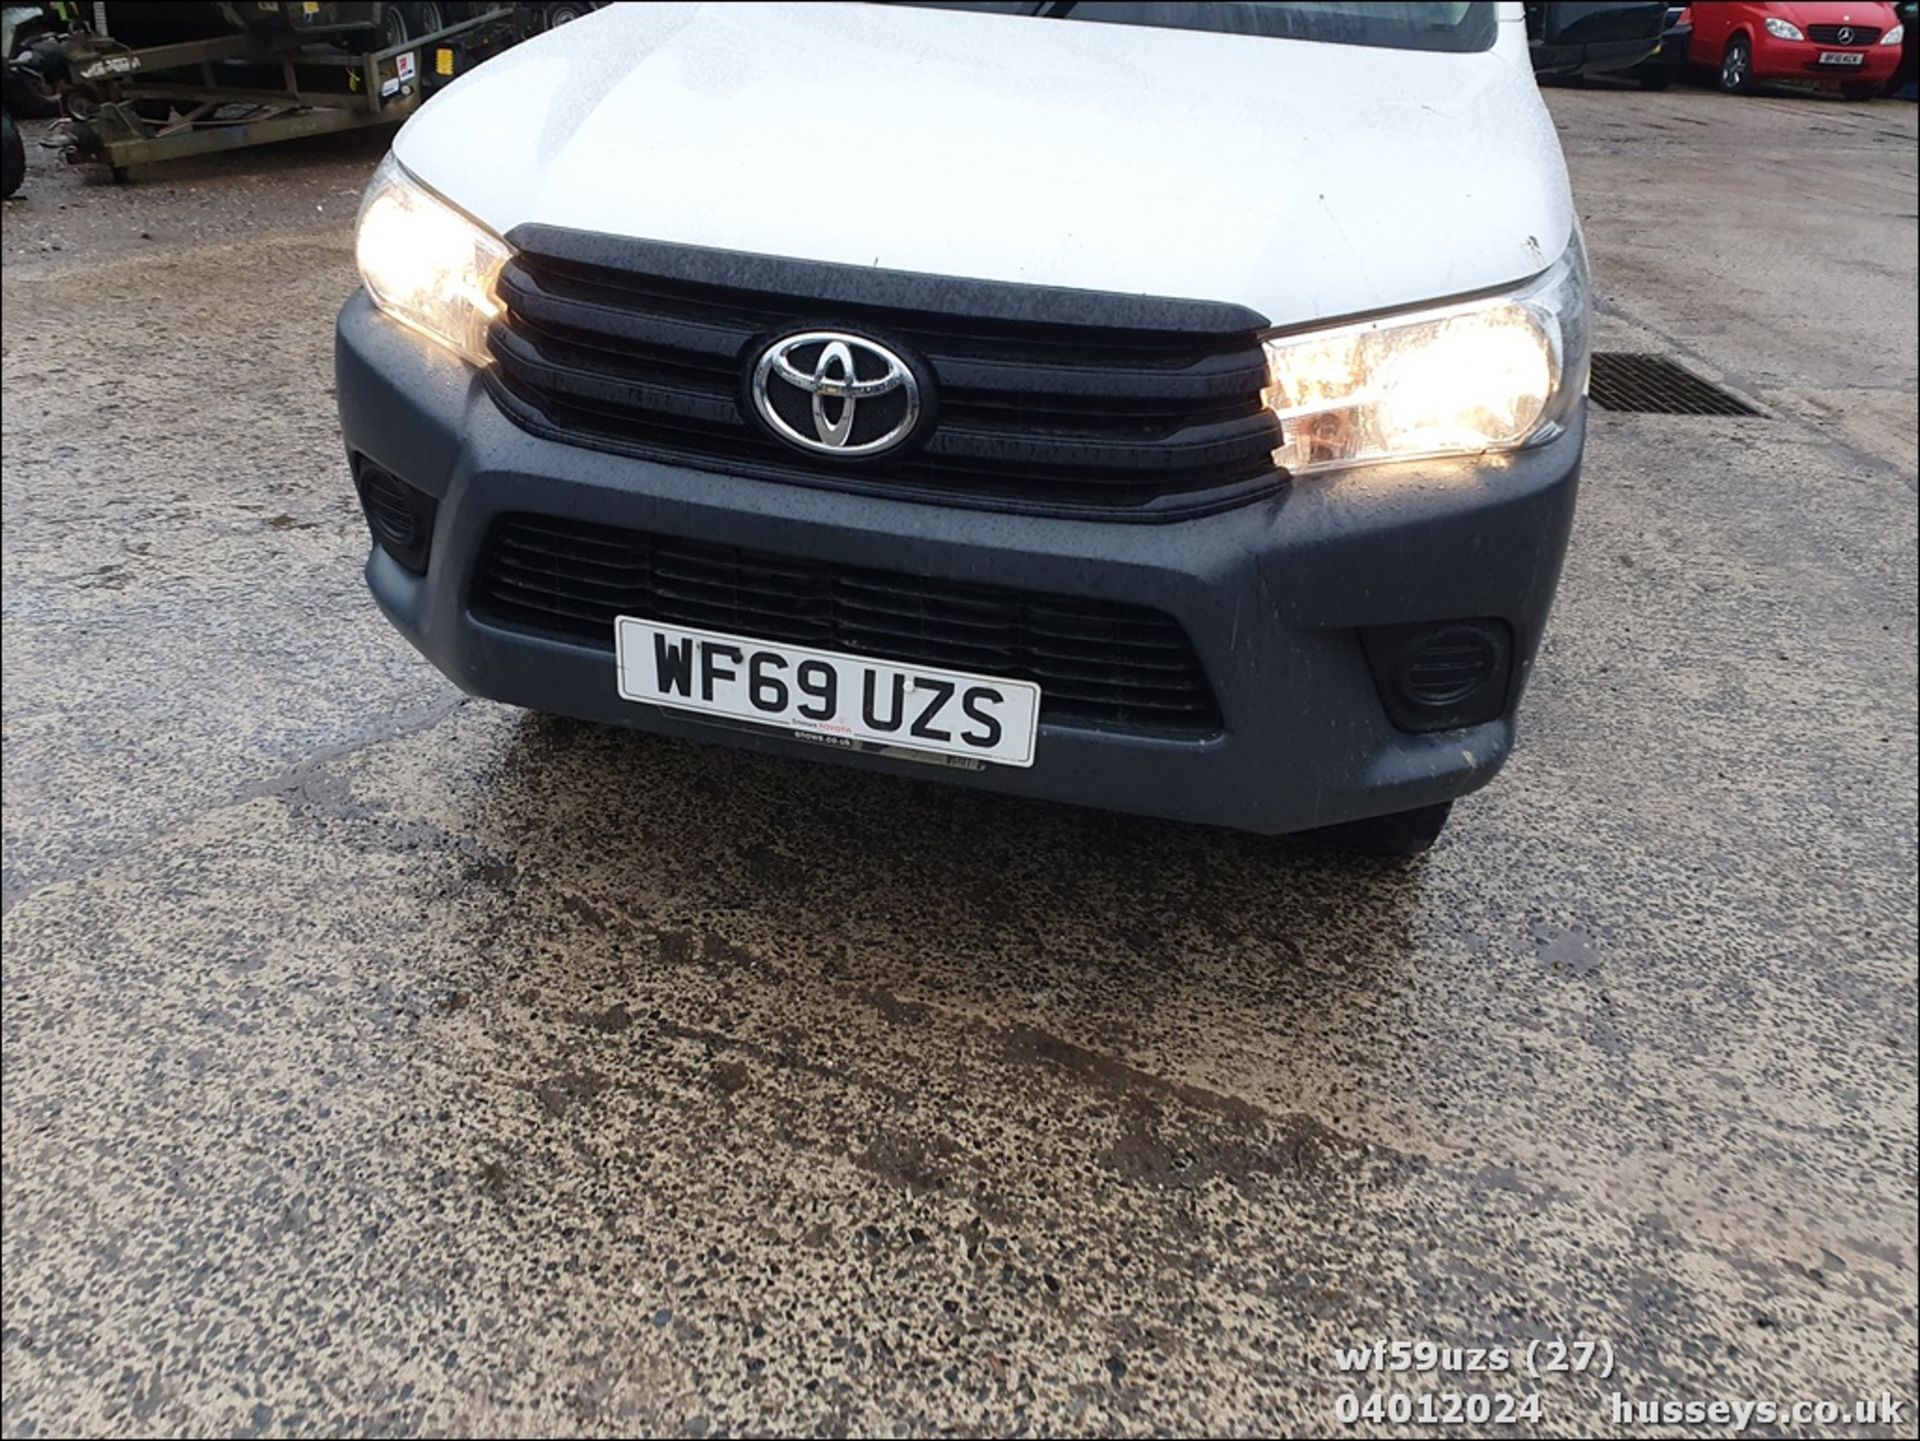 19/69 TOYOTA HILUX ACTIVE D-4D 4WD S/C - 2393cc 2dr 4x4 (White, 150k) - Image 29 of 50